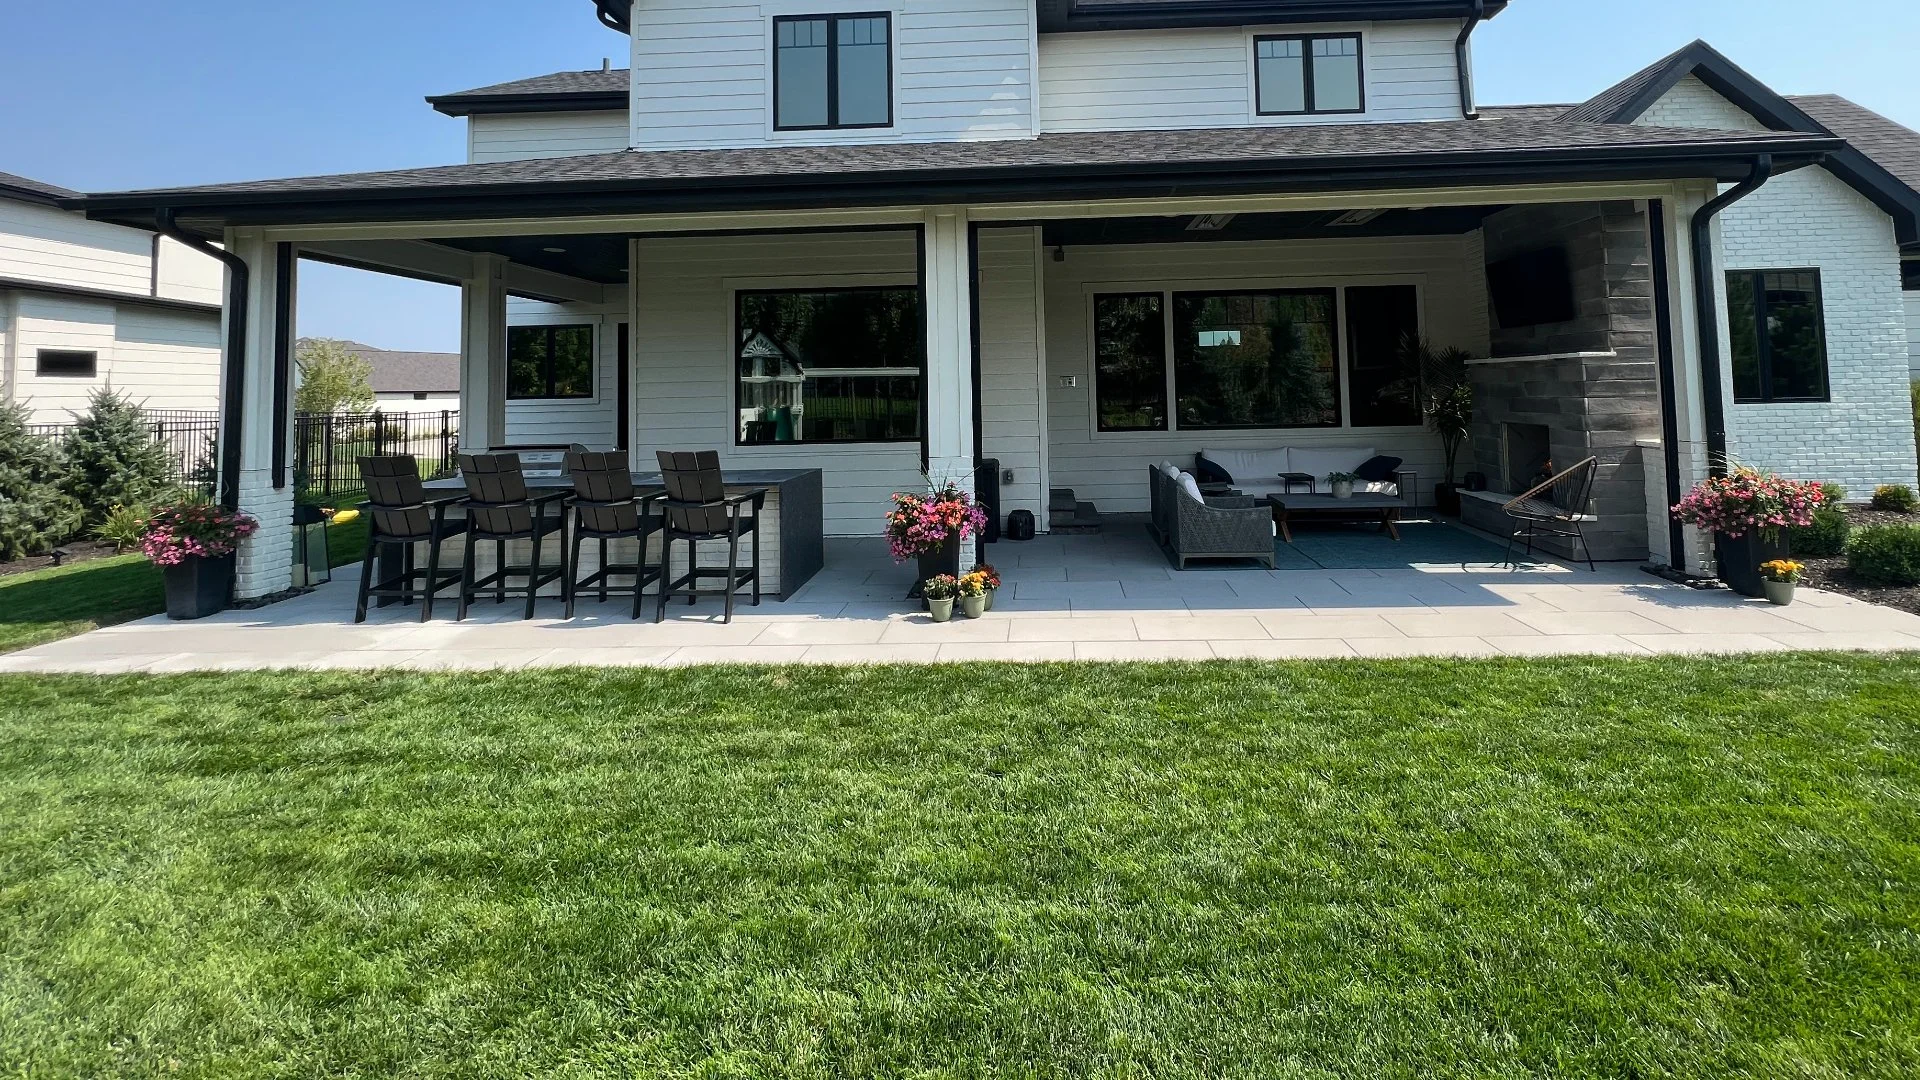 Our client's recently installed outdoor living space in Bellevue, NE.